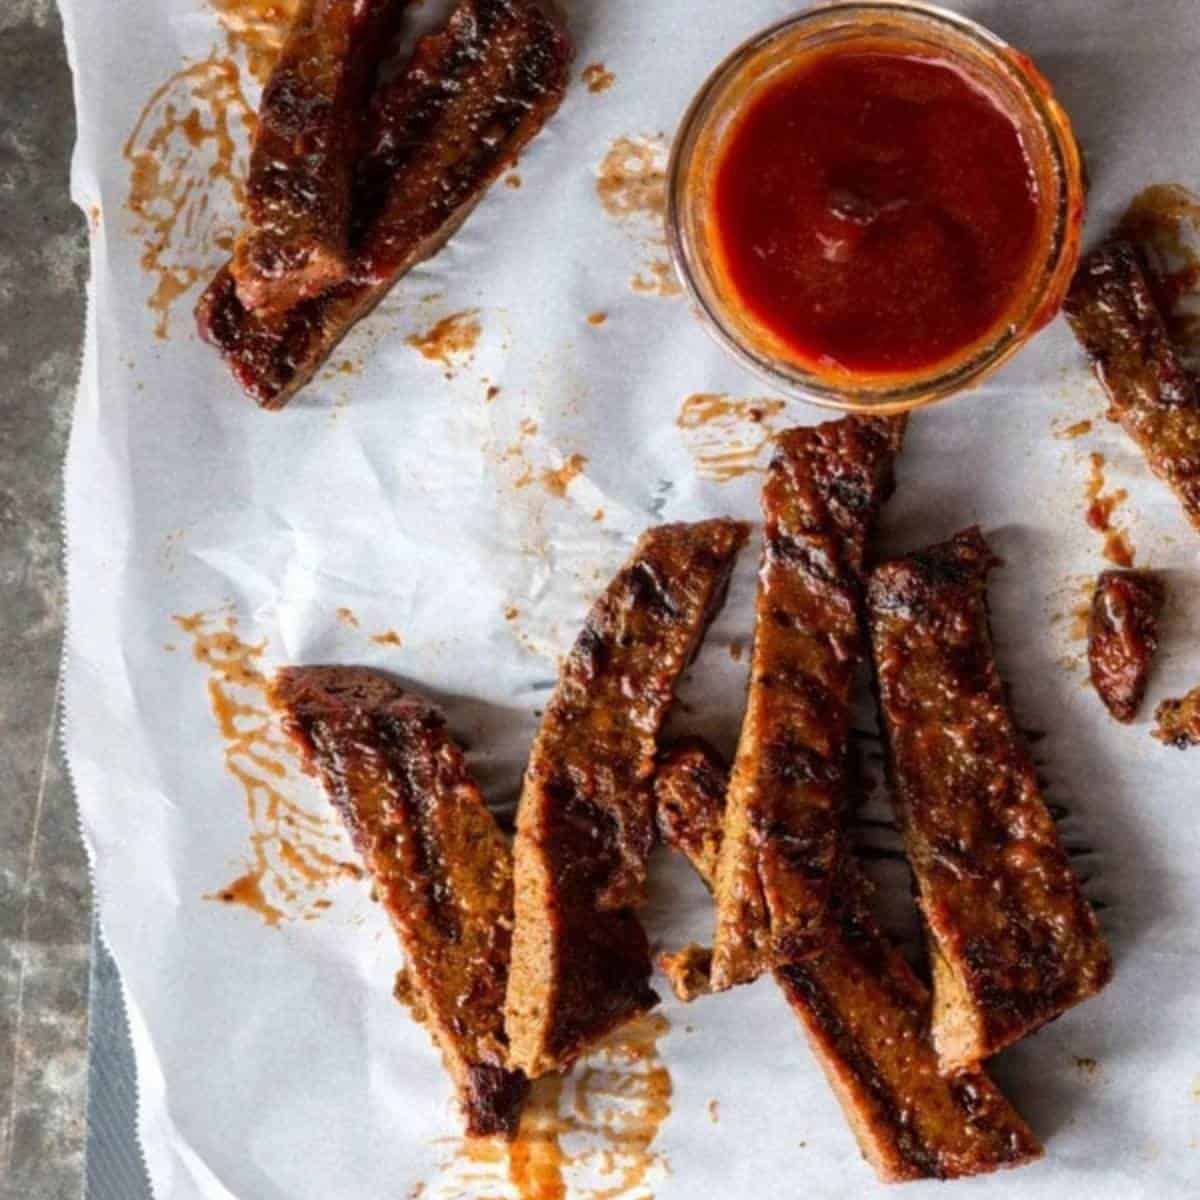 saucy vegan bbq ribs displayed with a side of bbq sauce.